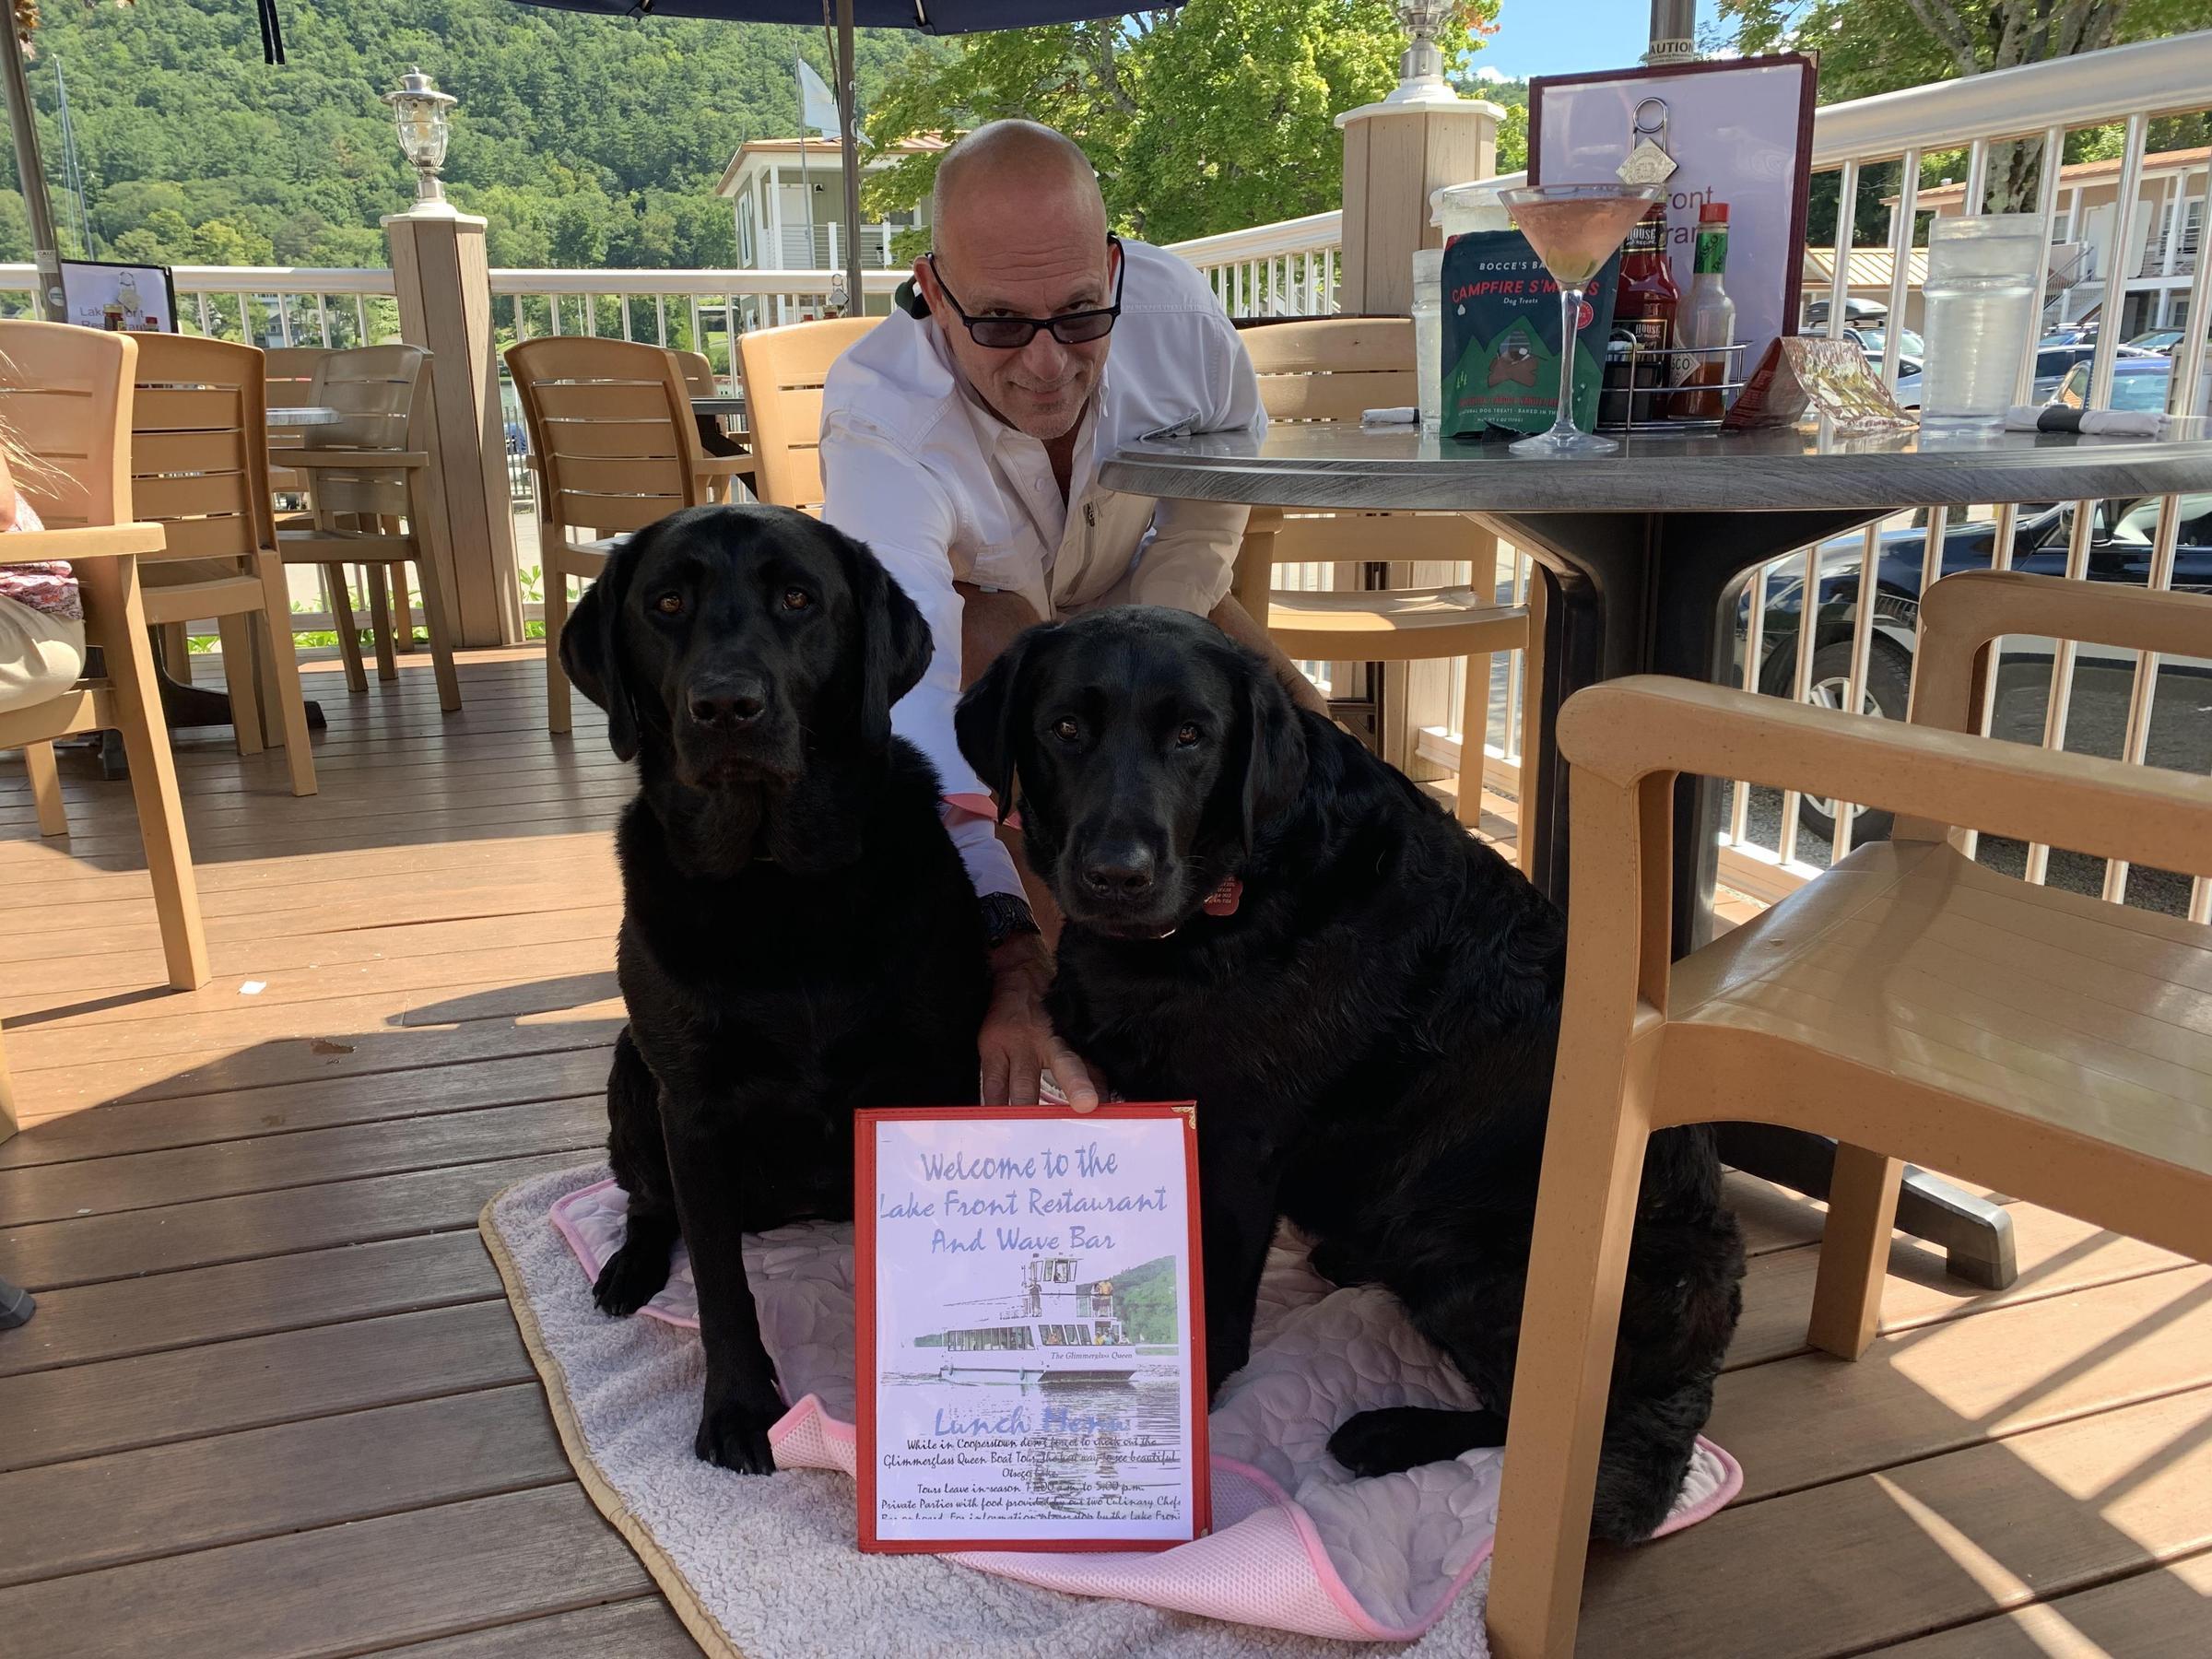 Pet Friendly Lake Front Restaurant and Bar